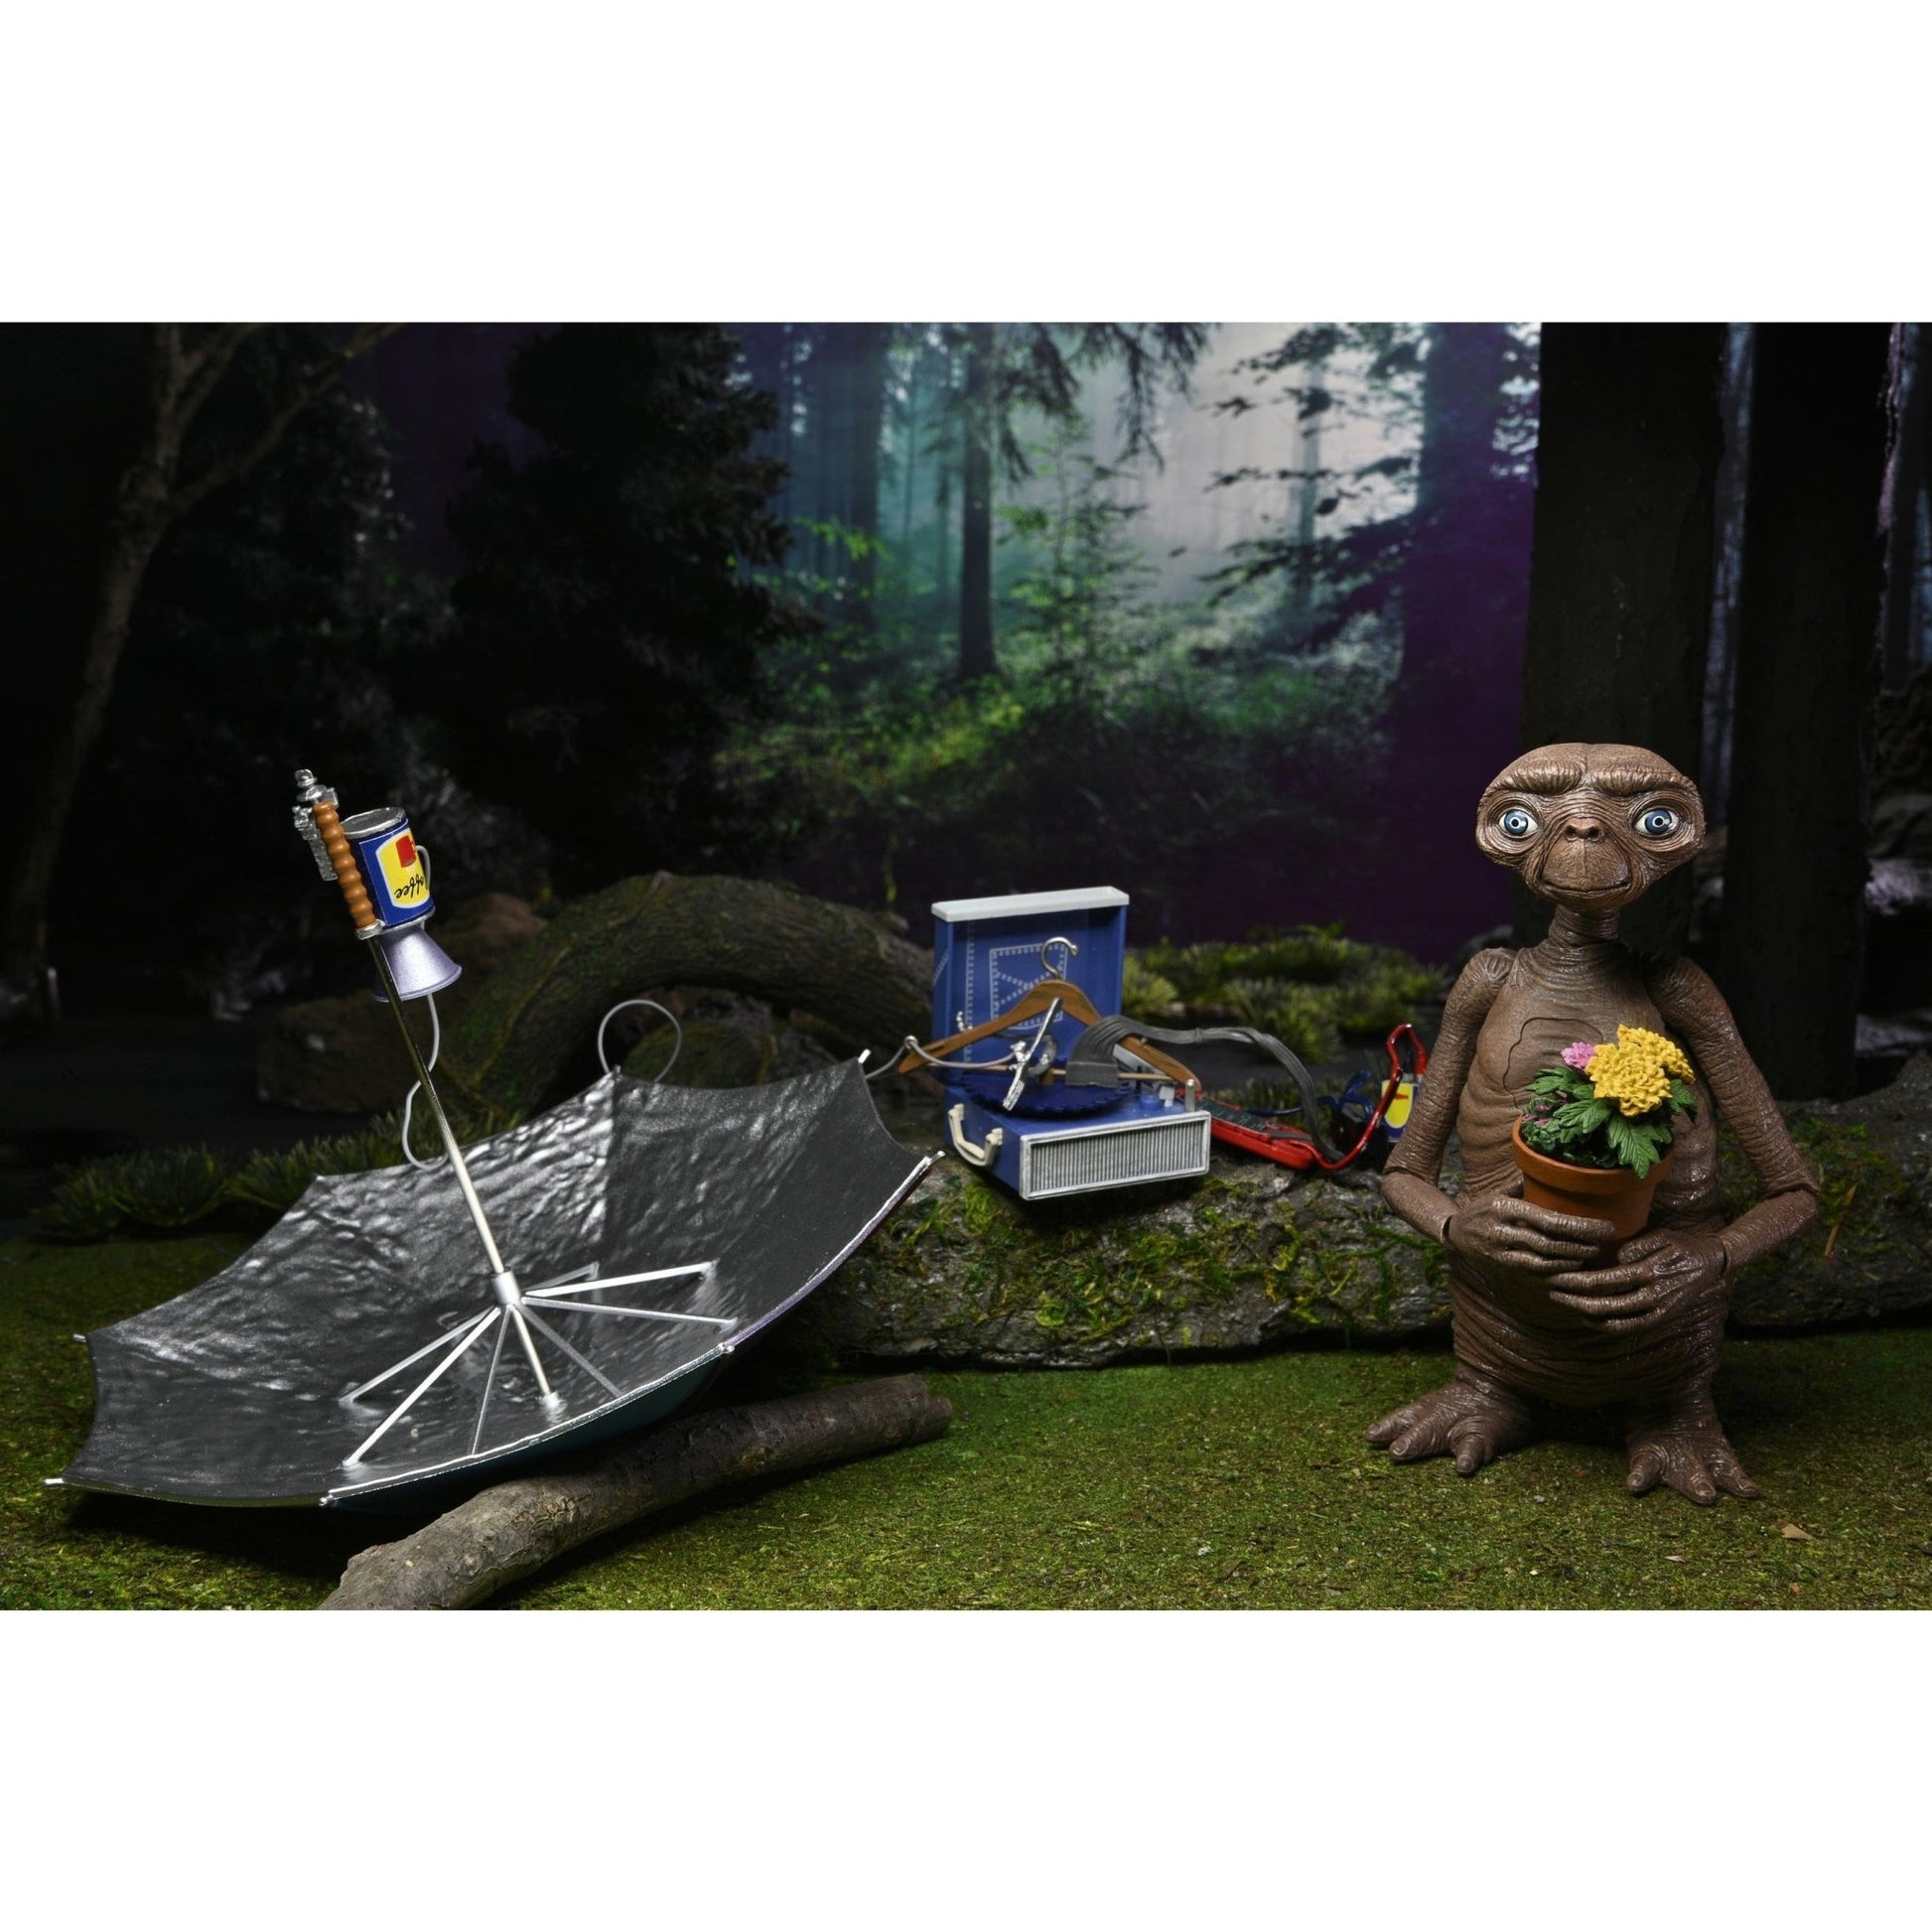 NECA E.T. The Extra Terrestrial Ultimate 7 Inch Action Figure w/LED Chest  40th Anniversary